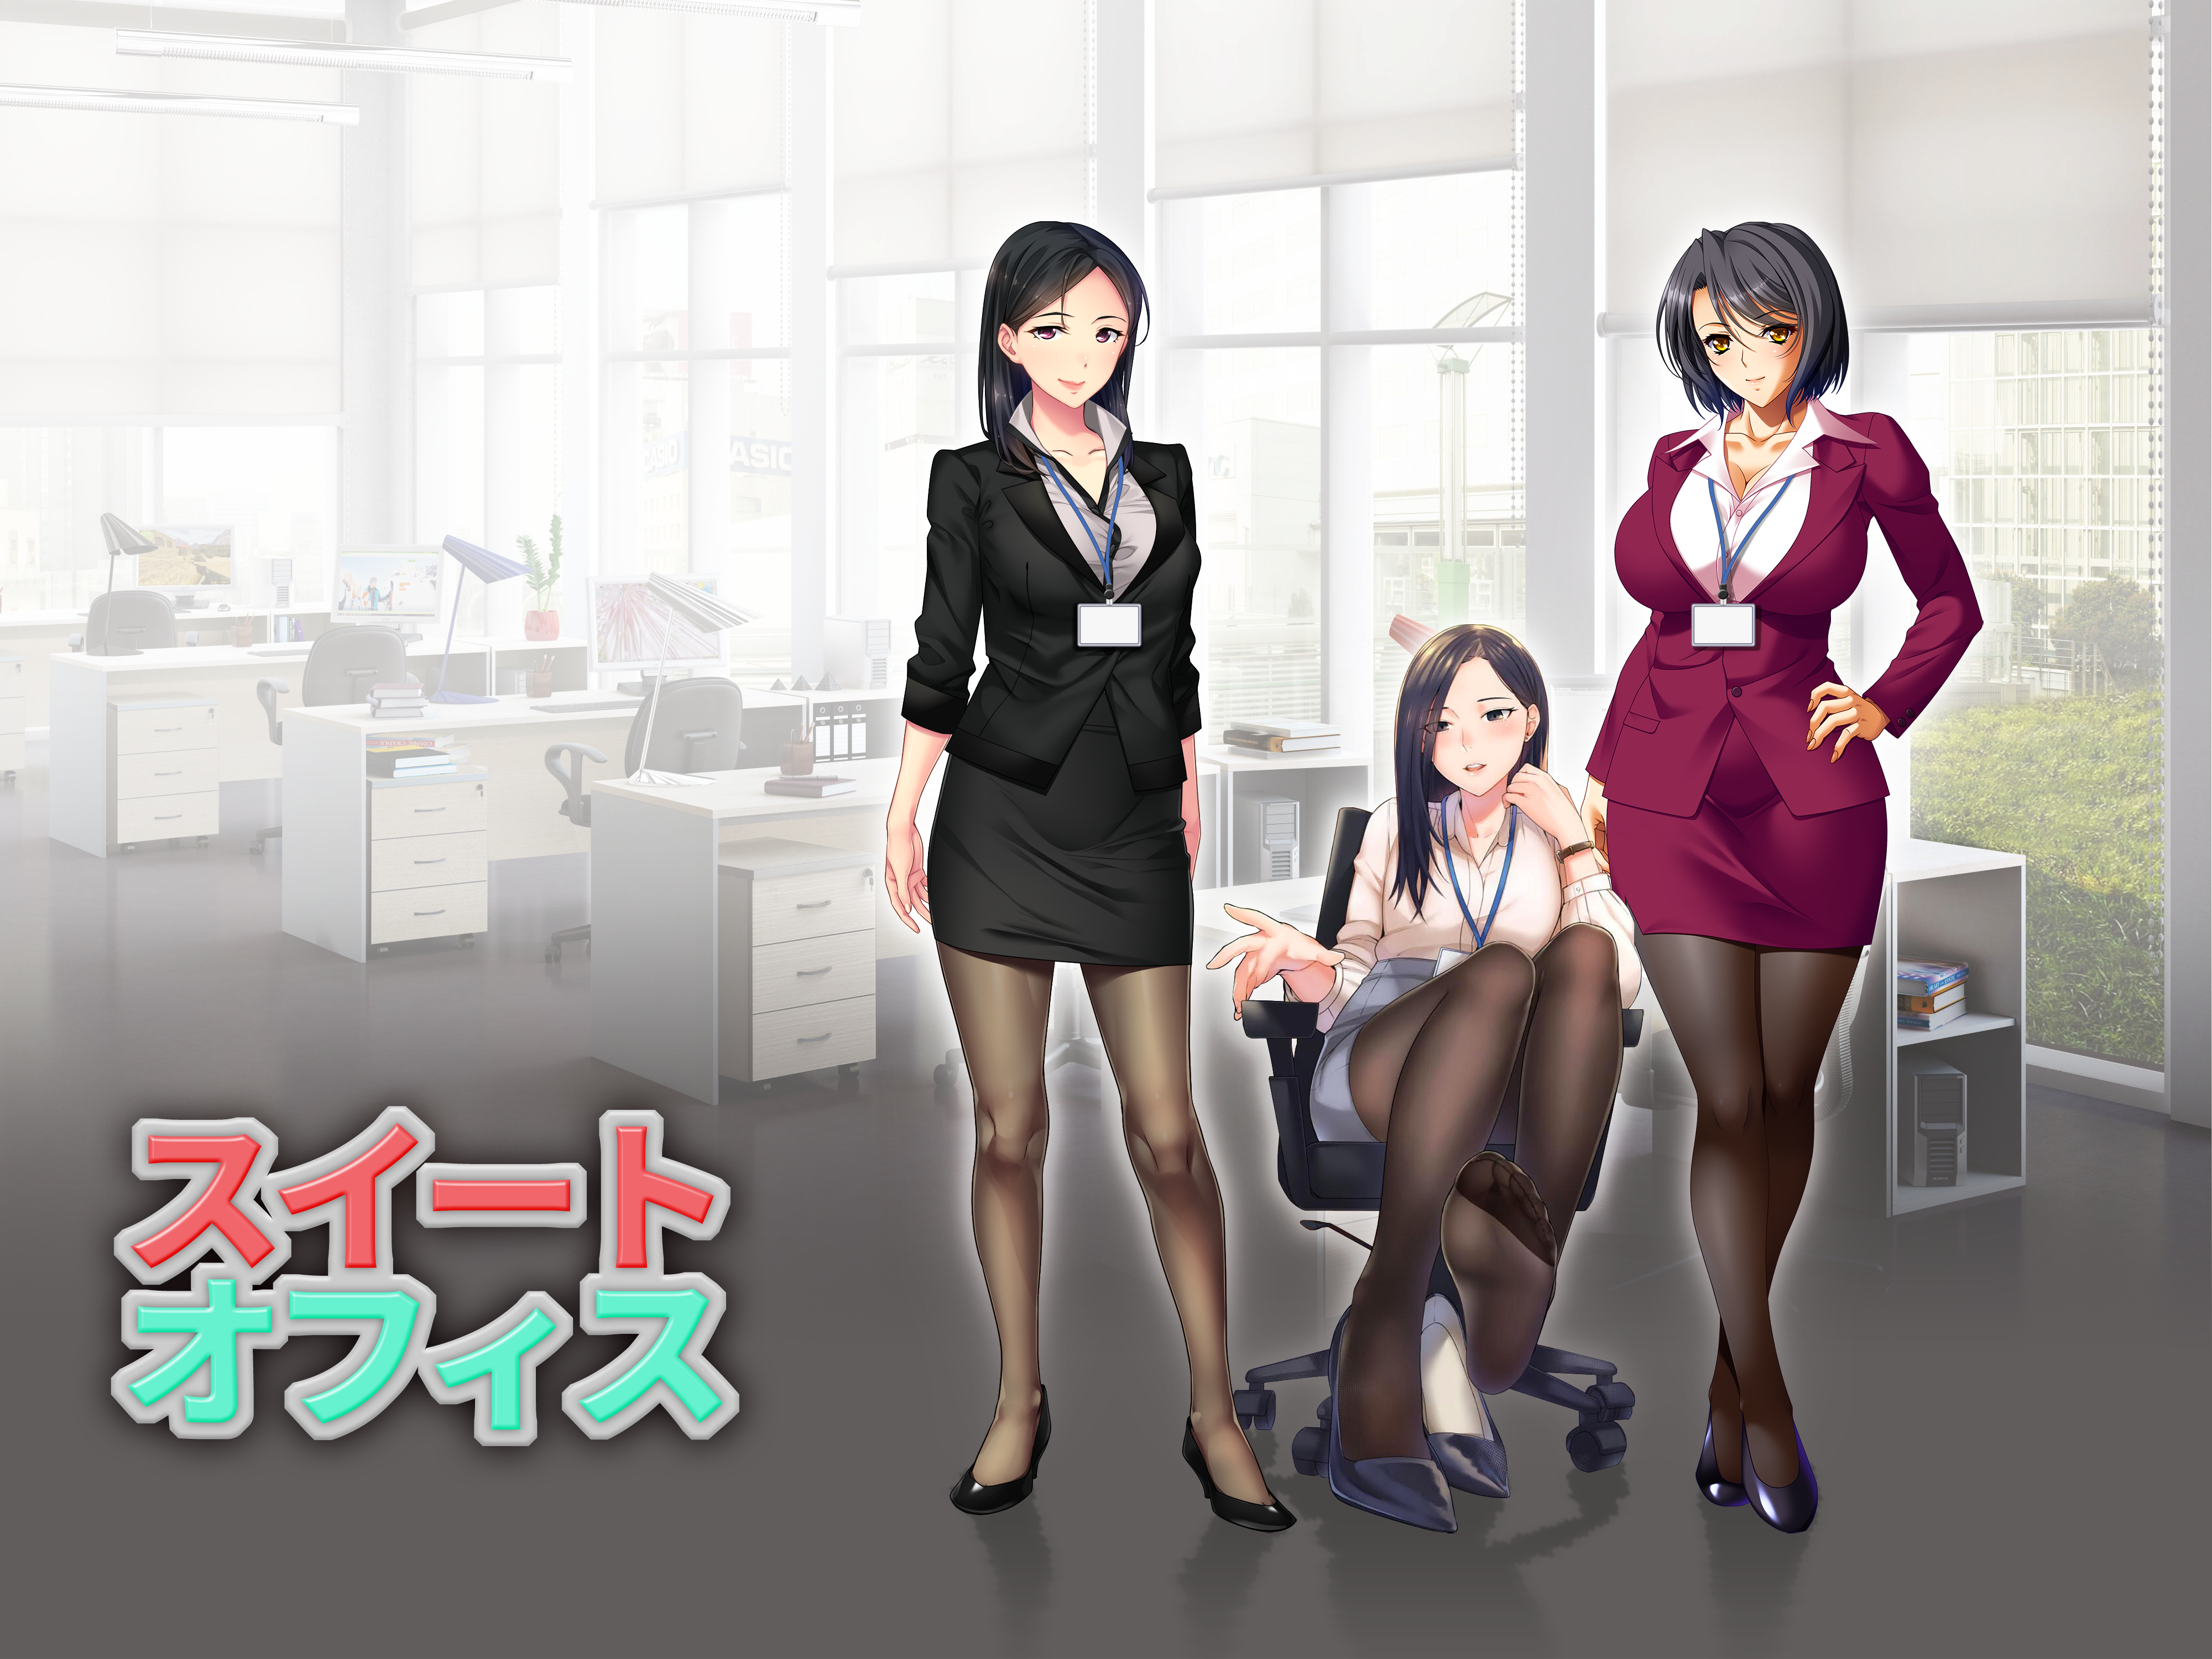 Office Girl Office Anime Girls Suits 4000x3000